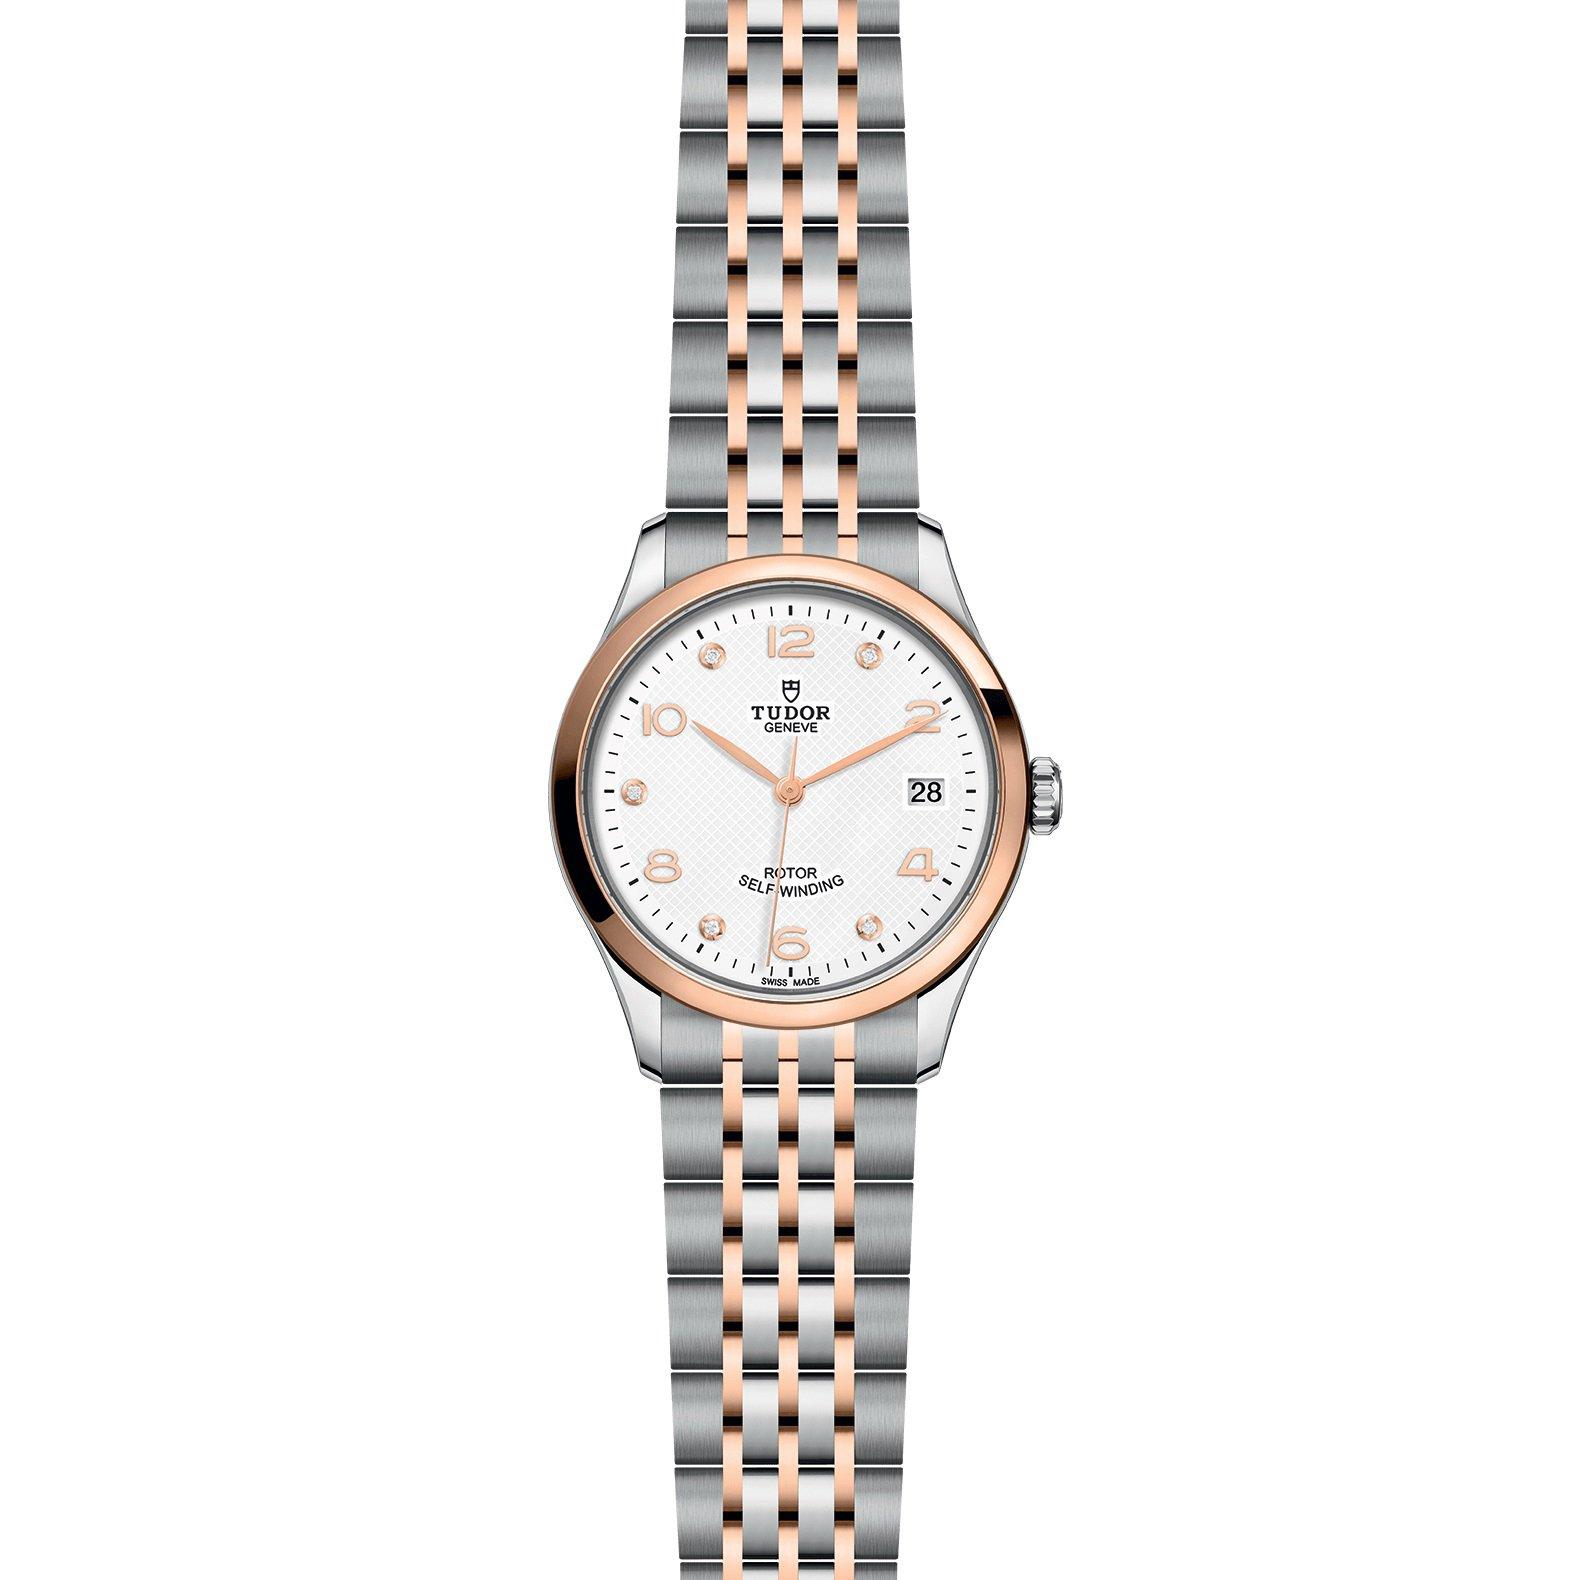 Tudor 1926 36 Stainless Steel and Rose Gold Diamond Watch M91451-0011 ...